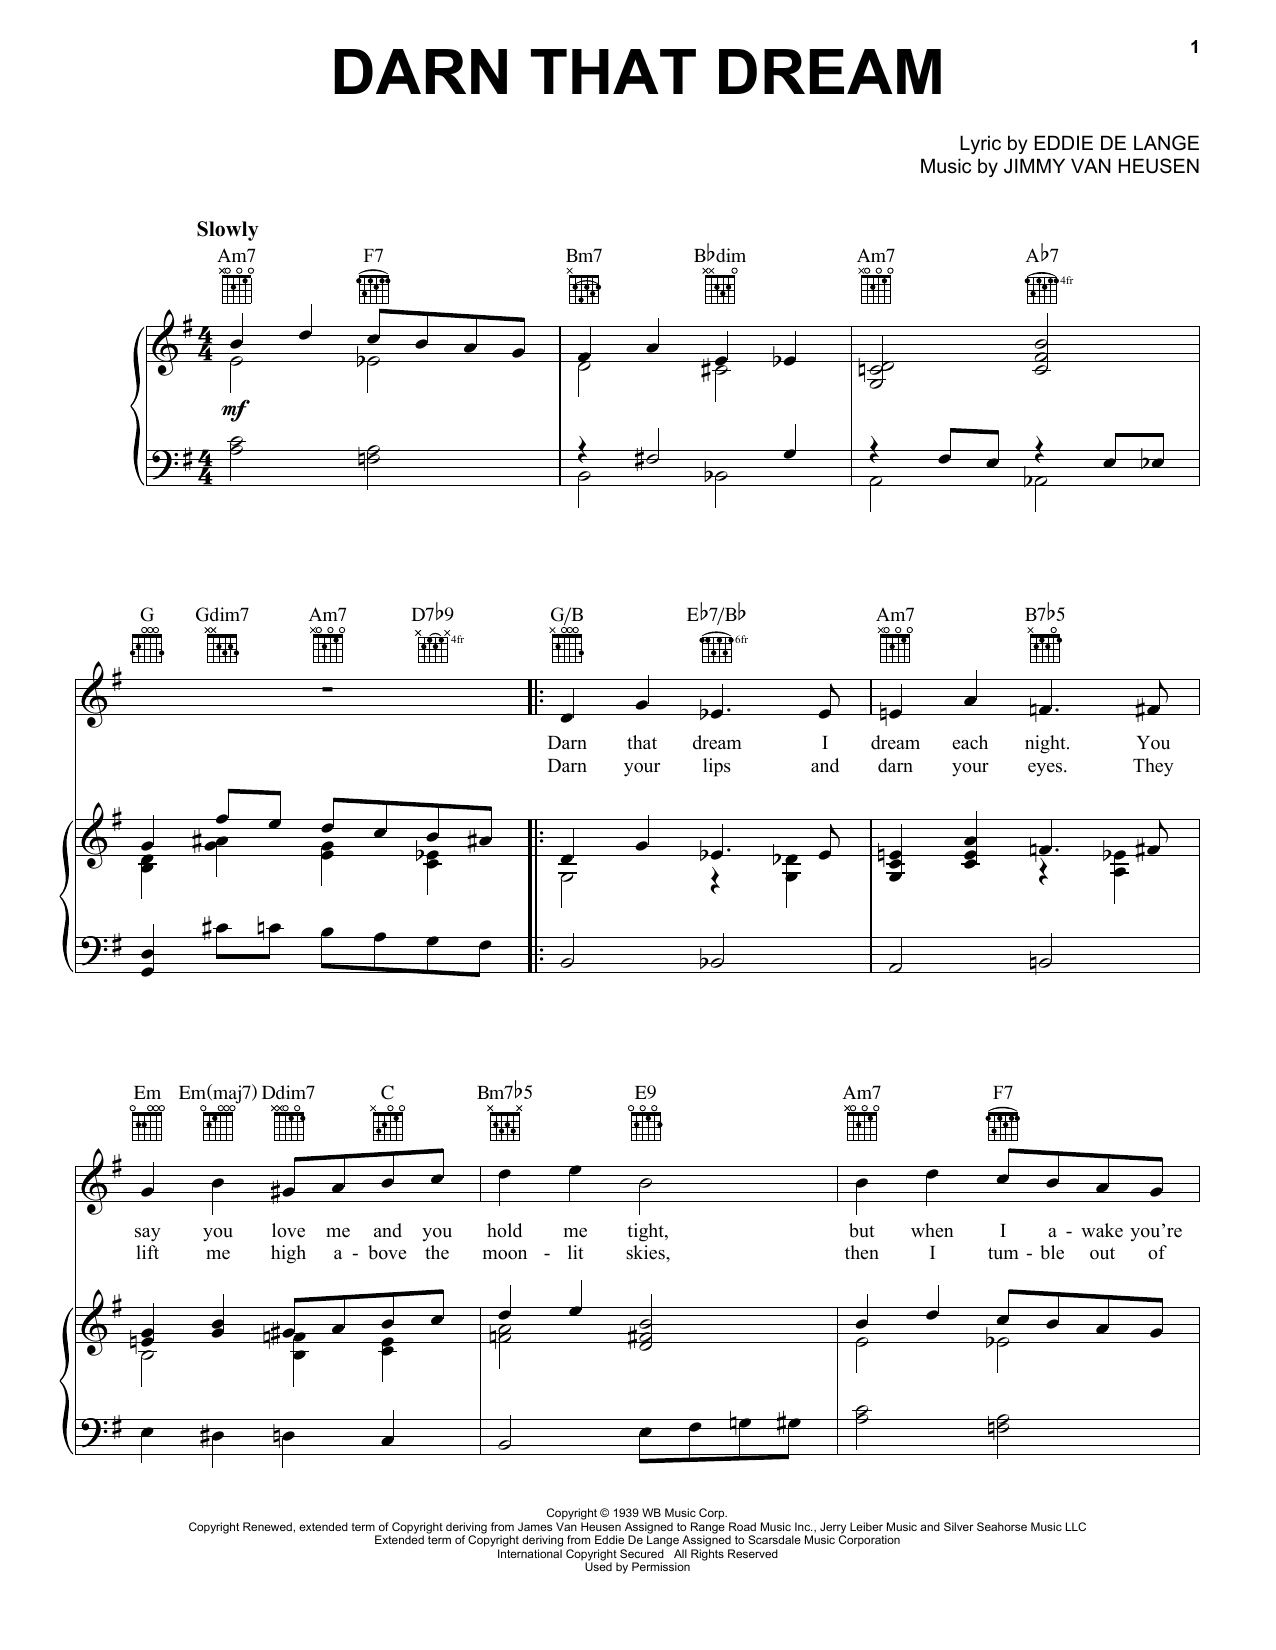 Benny Goodman Darn That Dream sheet music notes and chords. Download Printable PDF.